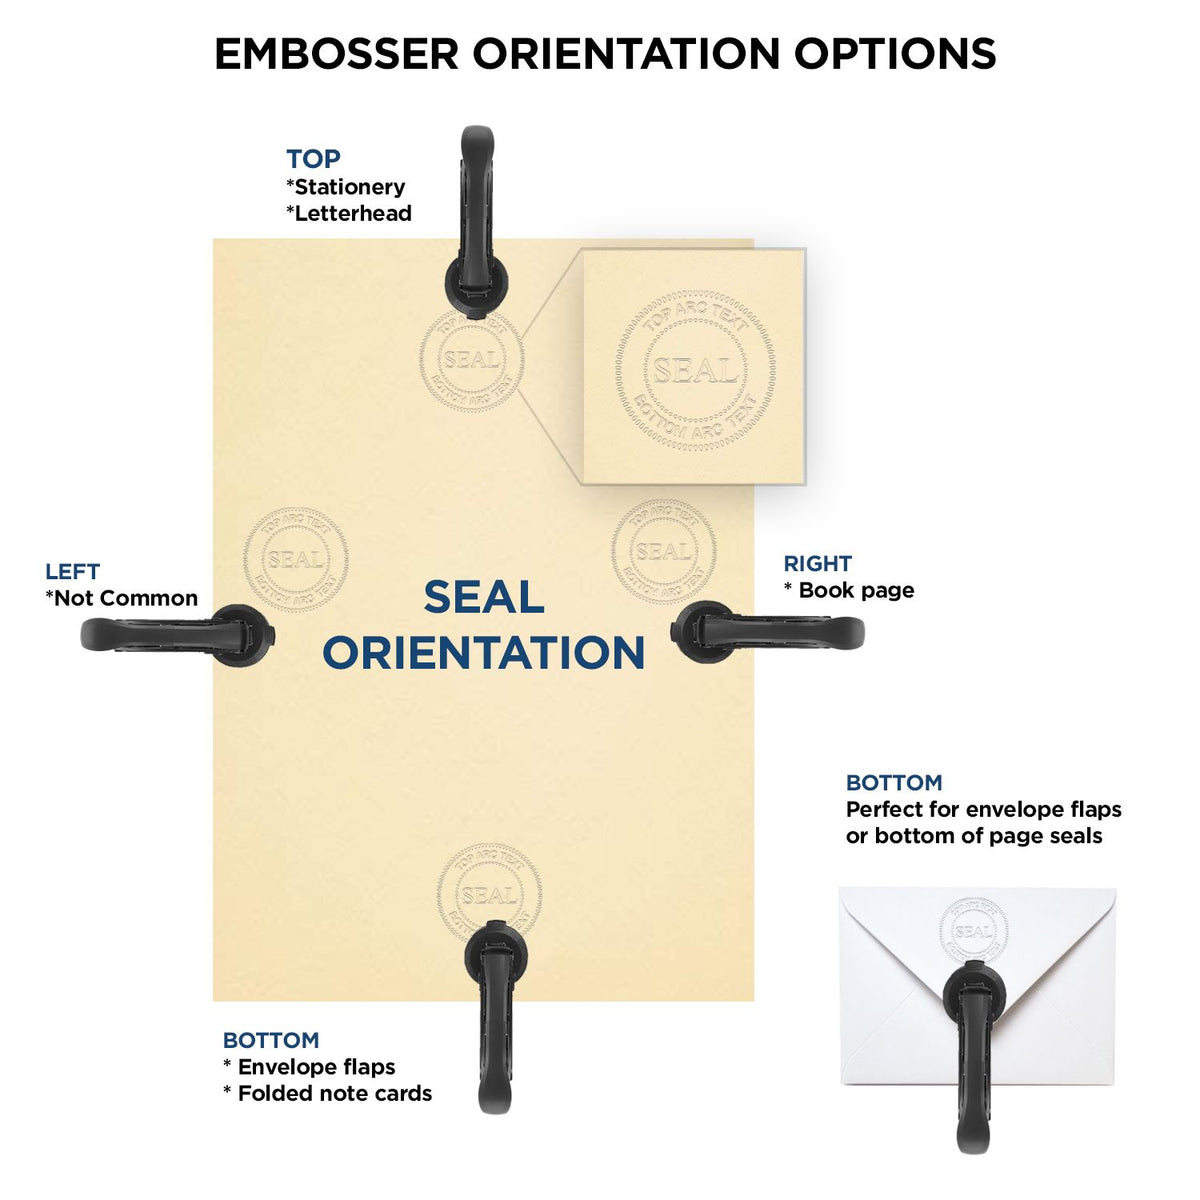 An infographic for the Gift Texas Land Surveyor Seal showing embosser orientation, this is showing examples of a top, bottom, right and left insert.